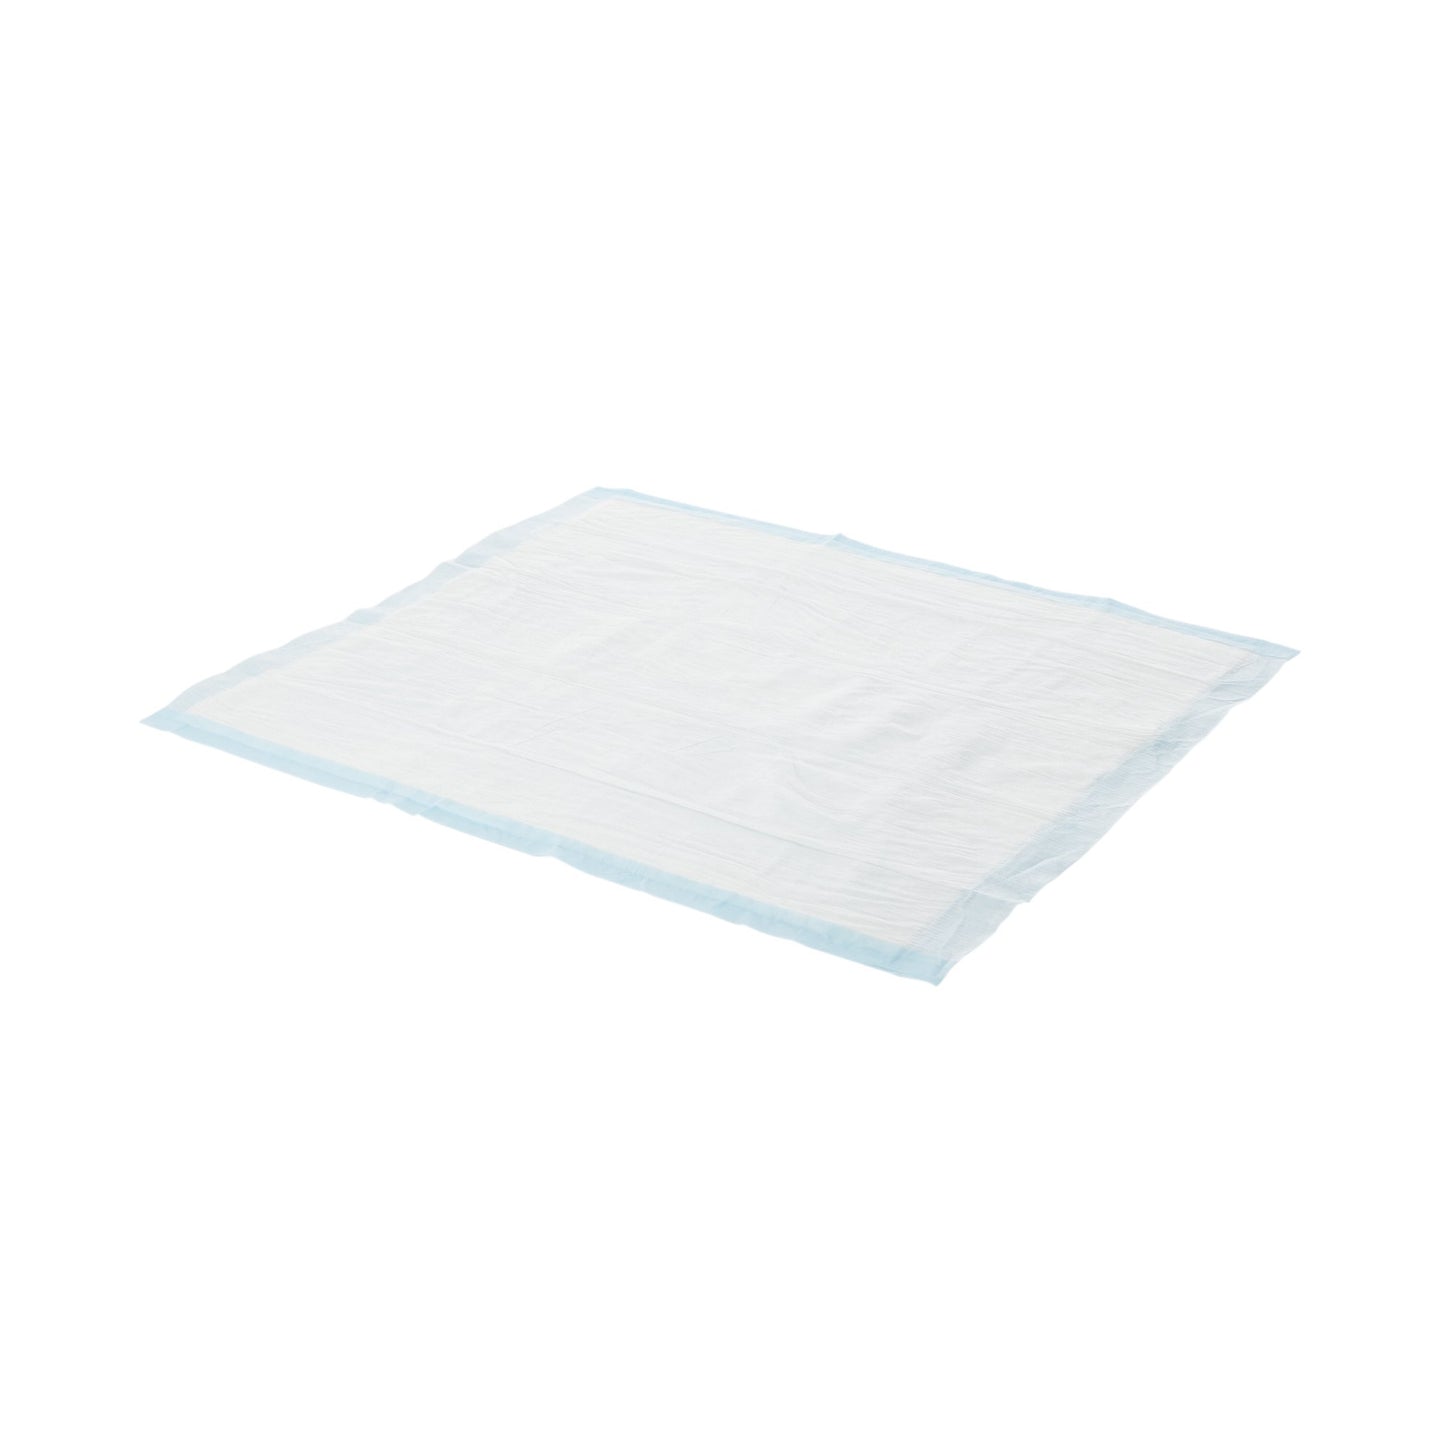 Prevail® Air Permeable Low Air Loss Underpad, 23 x 36 Inch, 12 ct